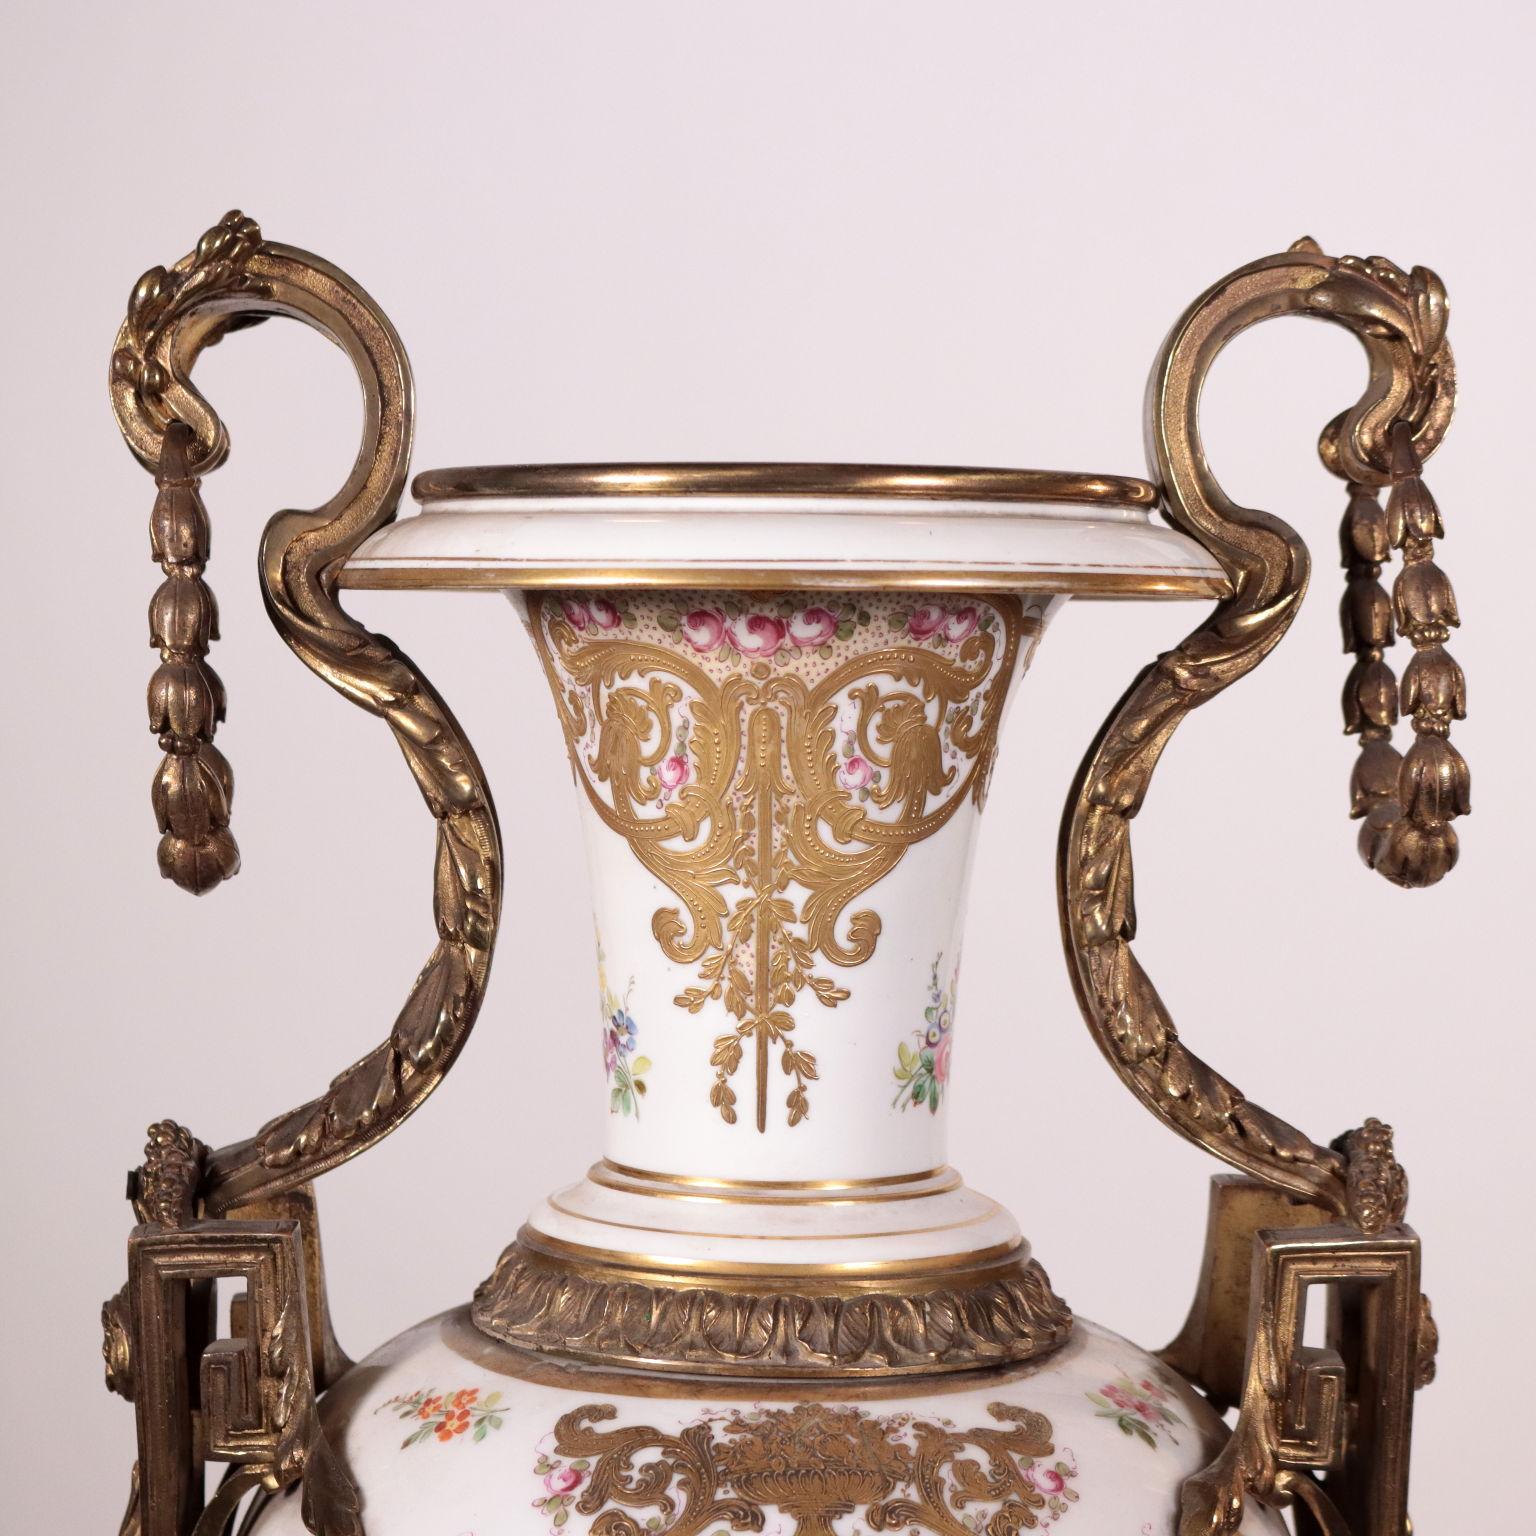 Large porcelain and gilded bronze vase. The vase is supported by a square gilded bronze base, chiselled with vegetal motifs decorations. A spilled porcelain cup and a brass cap support the body of the vase, finely decorated with paintings inside the